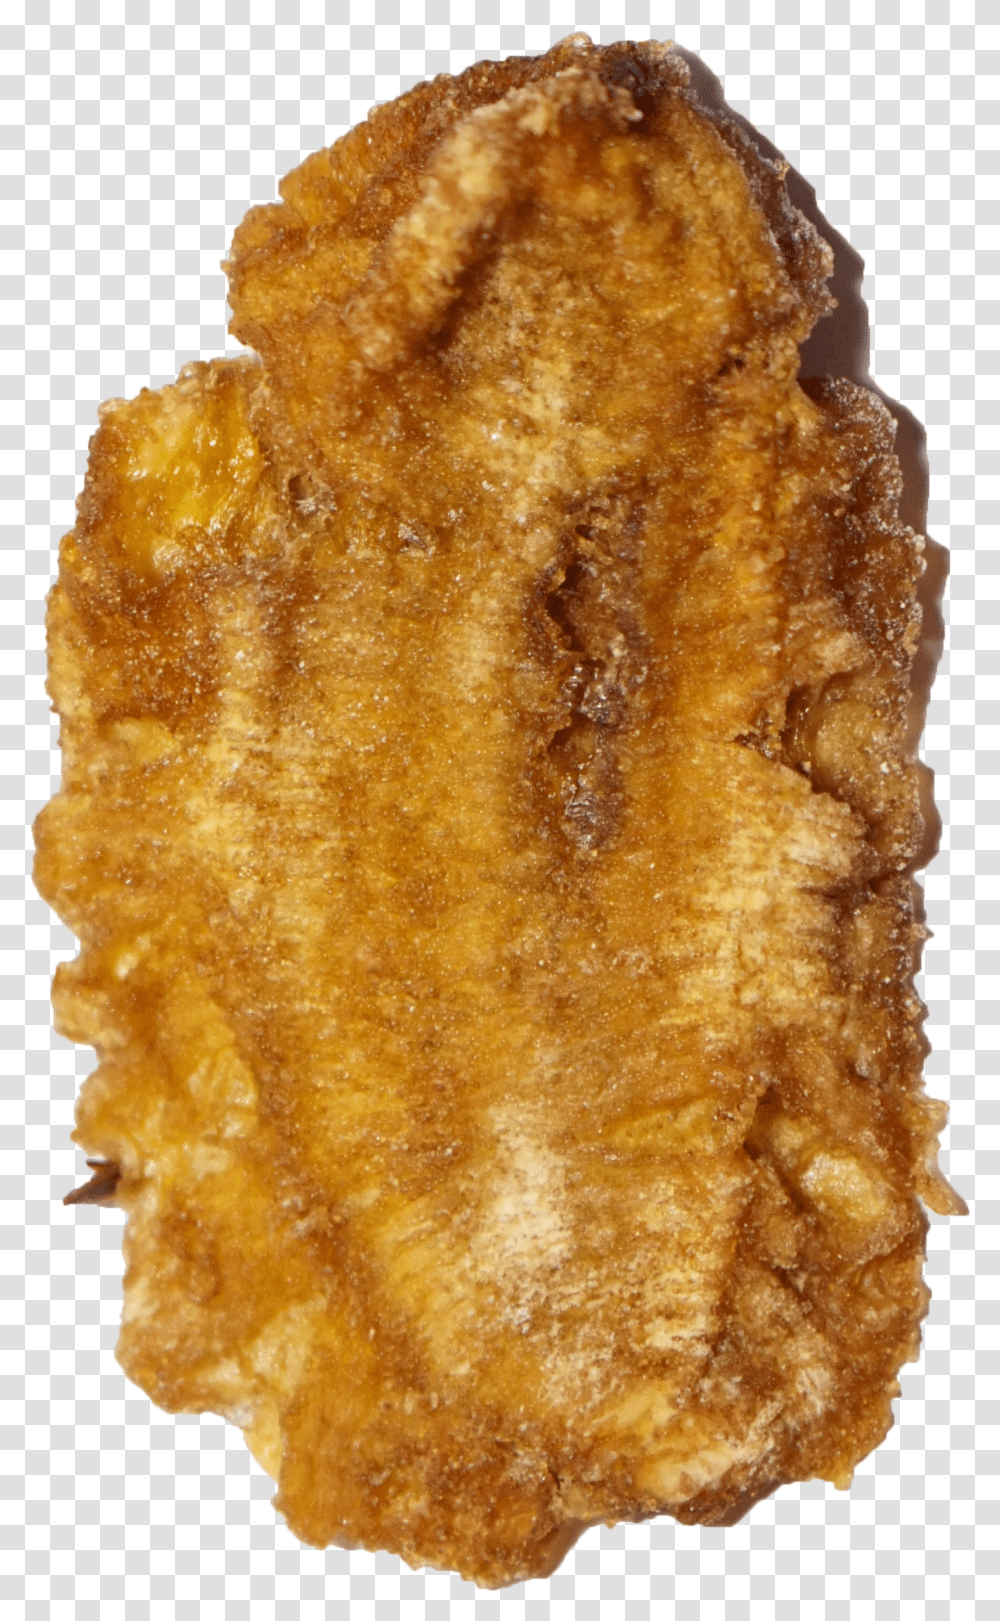 Dried Banana Bk Chicken Nuggets Transparent Png